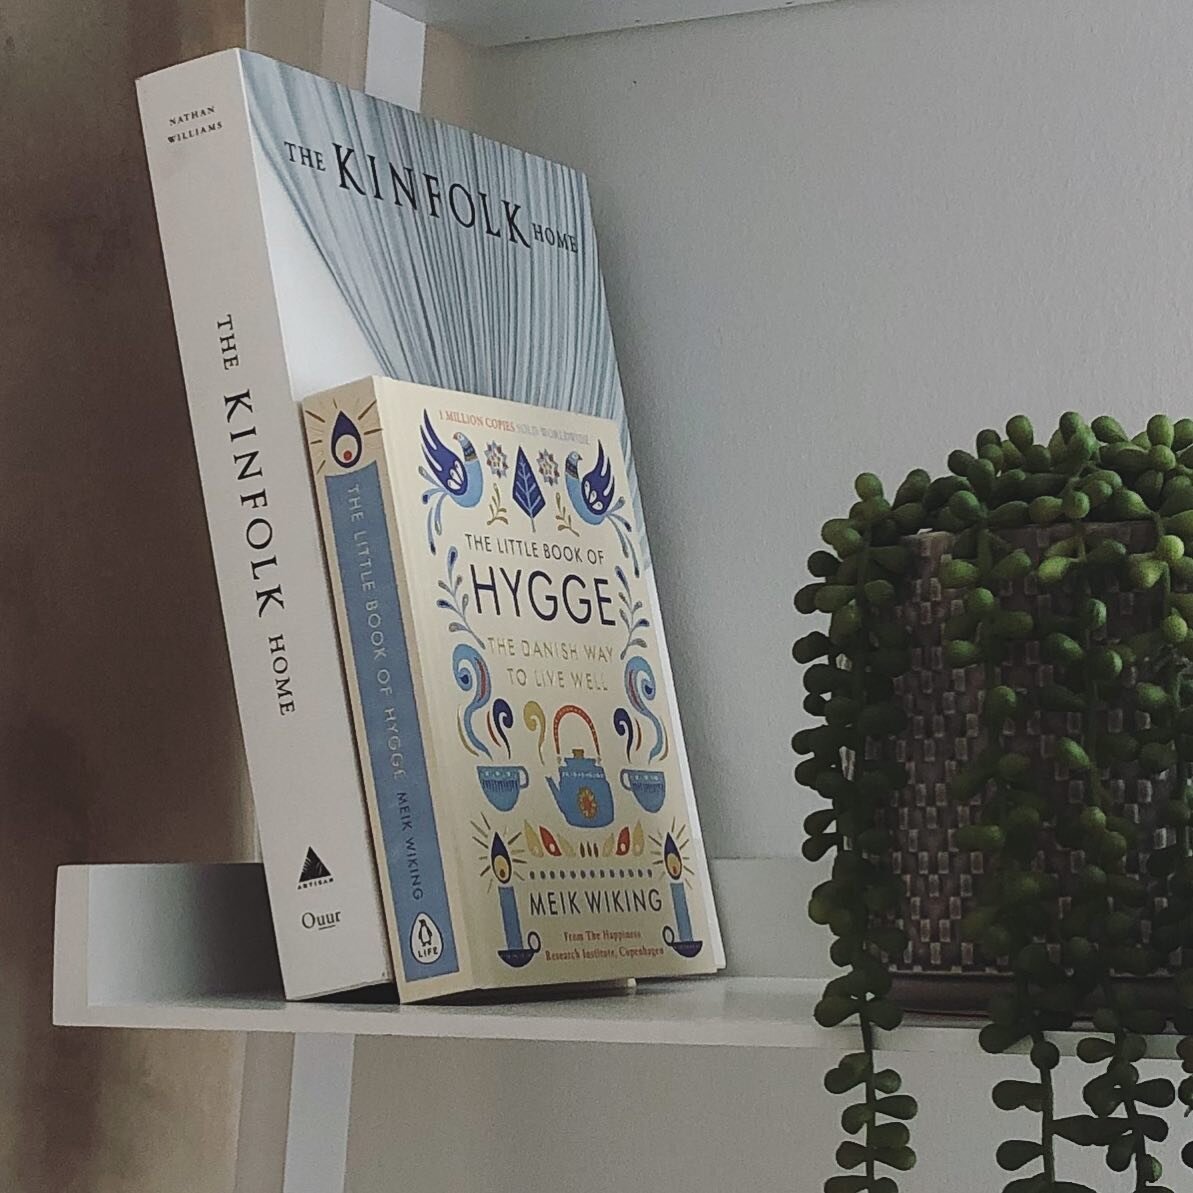 My styling stories edit is now in my highlights! 🙌🏻
Spending this Sunday clearing my phone and my computer of stuff so I can film more content!
.
.
.
#blog #blogger #styling #plants #books #hygge #kinfolk #styling #homedecor #scandi #scandinavianst